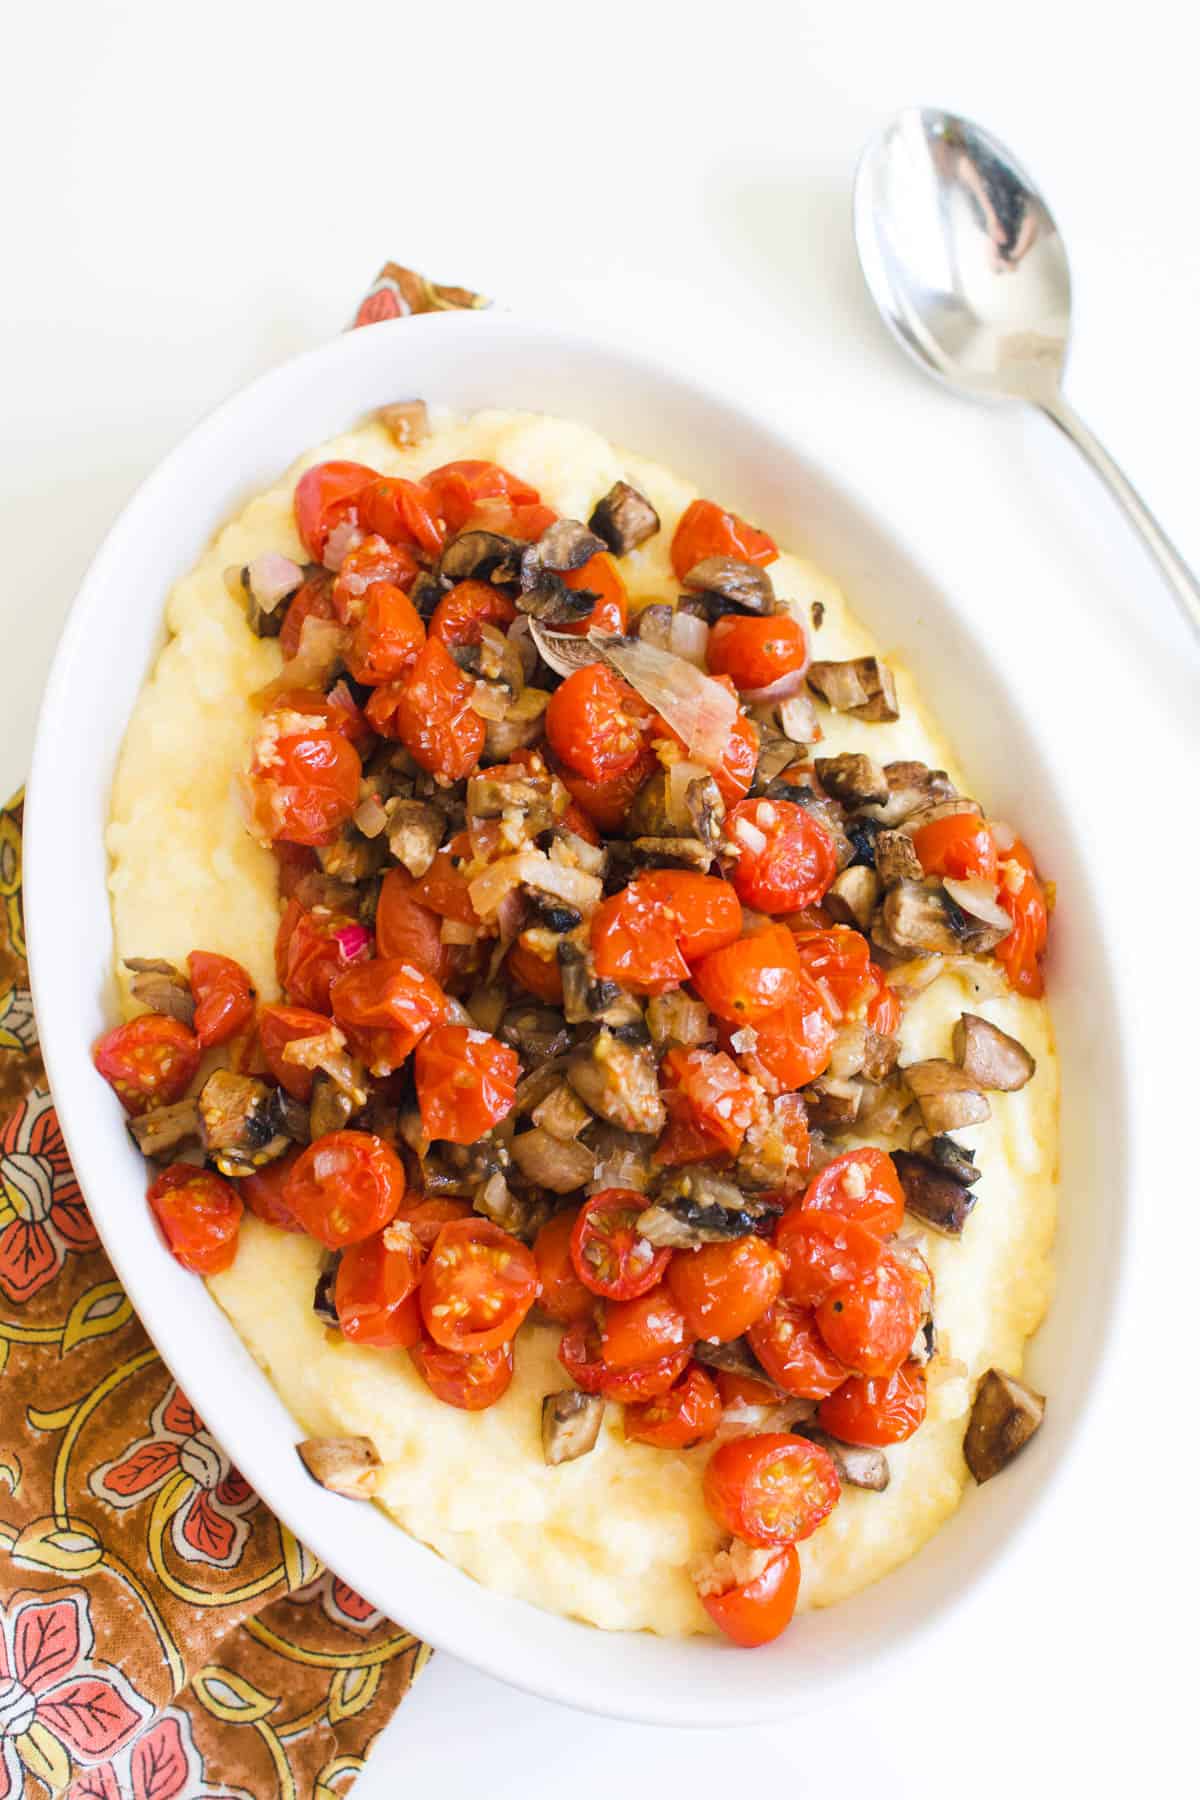 Overhead shot of a serving dish with roasted tomatoes and mushrooms on top of creamy polenta.